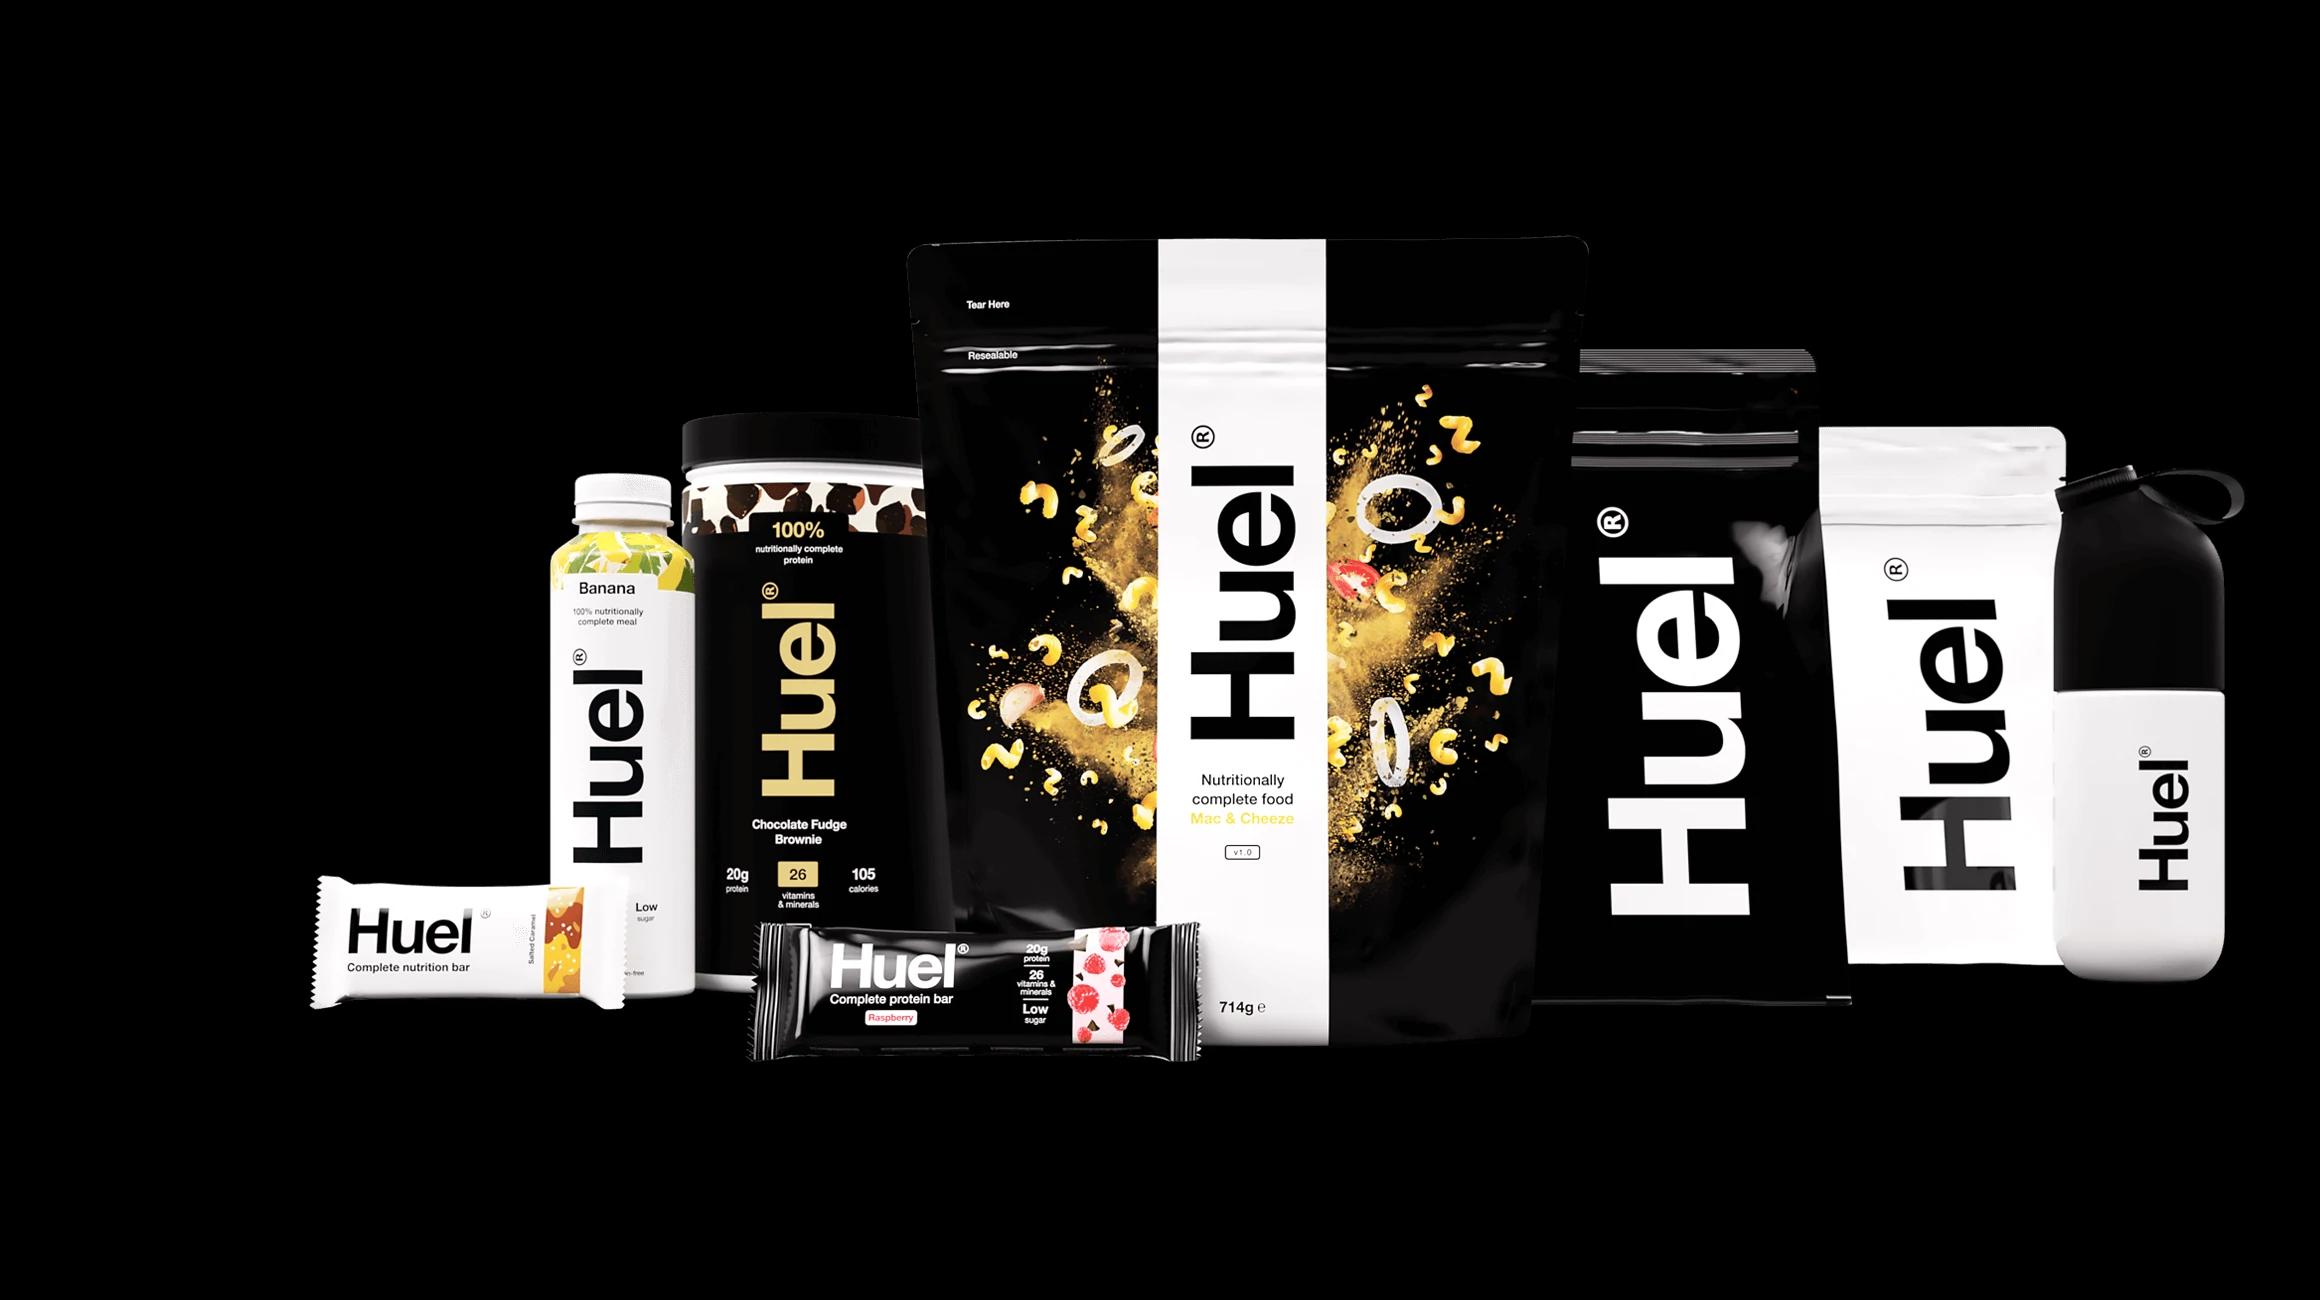 Huel Is the Fuel That Outruns Other Meal Replacement Shakes